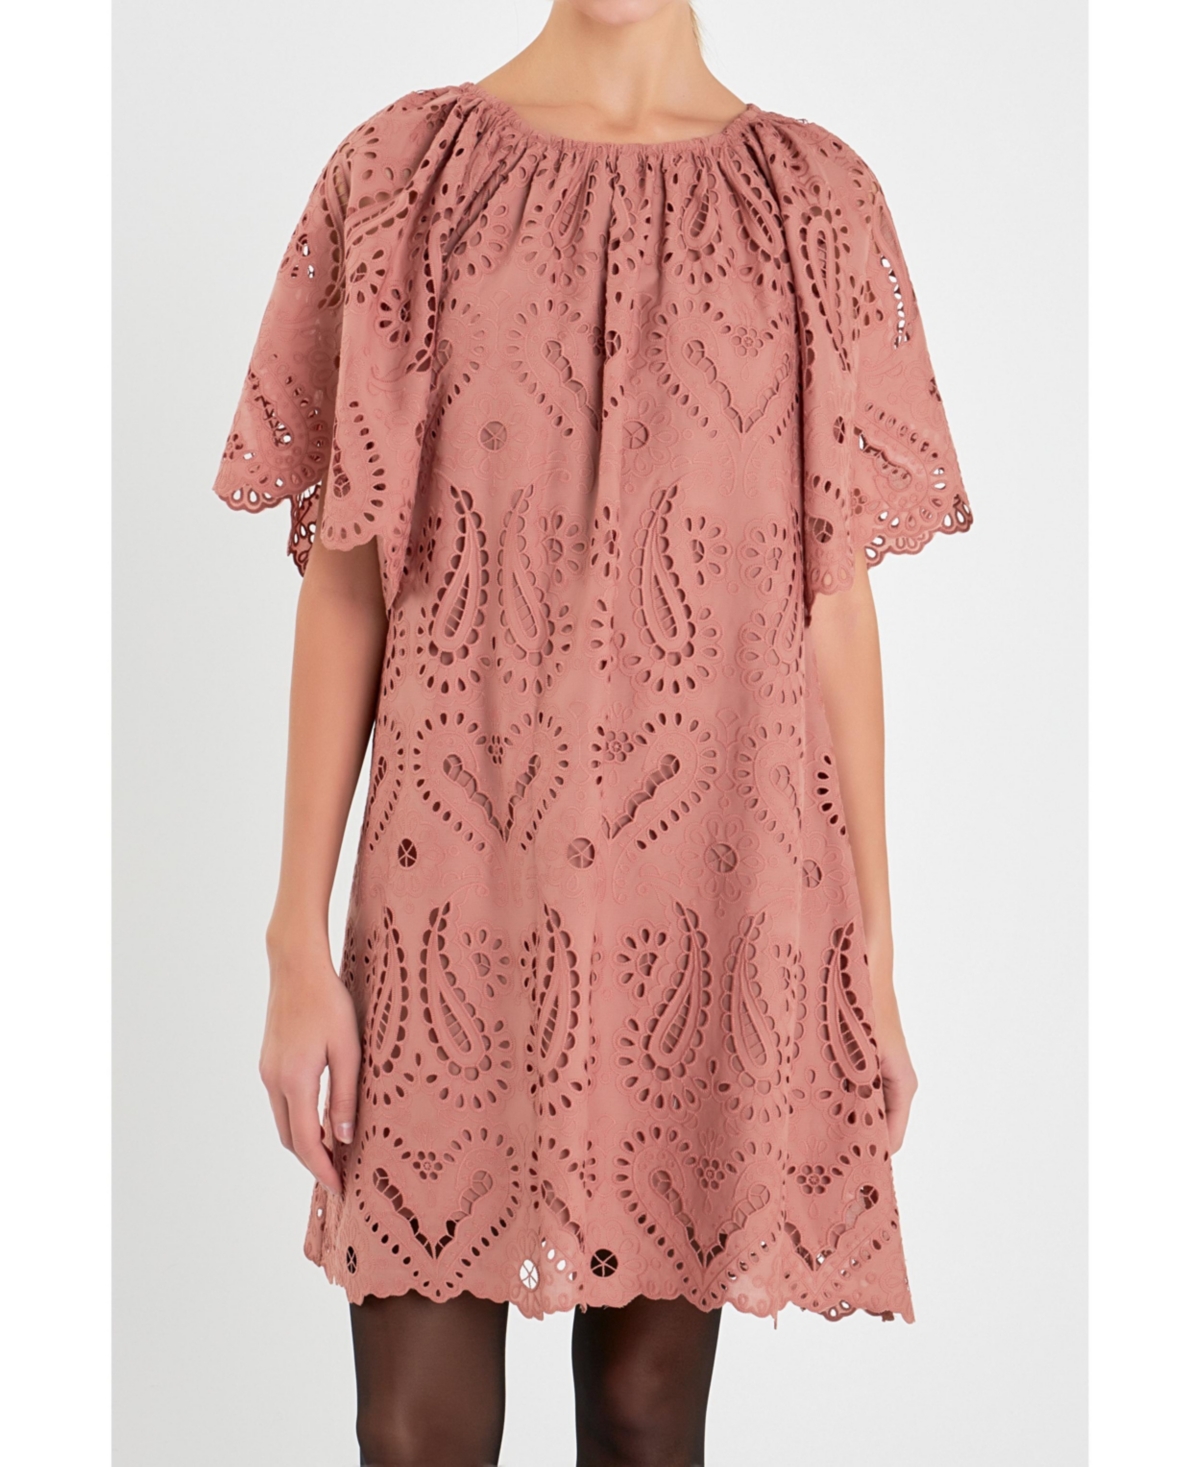 Women's Paisley Embroidered Mini Dress - Camel